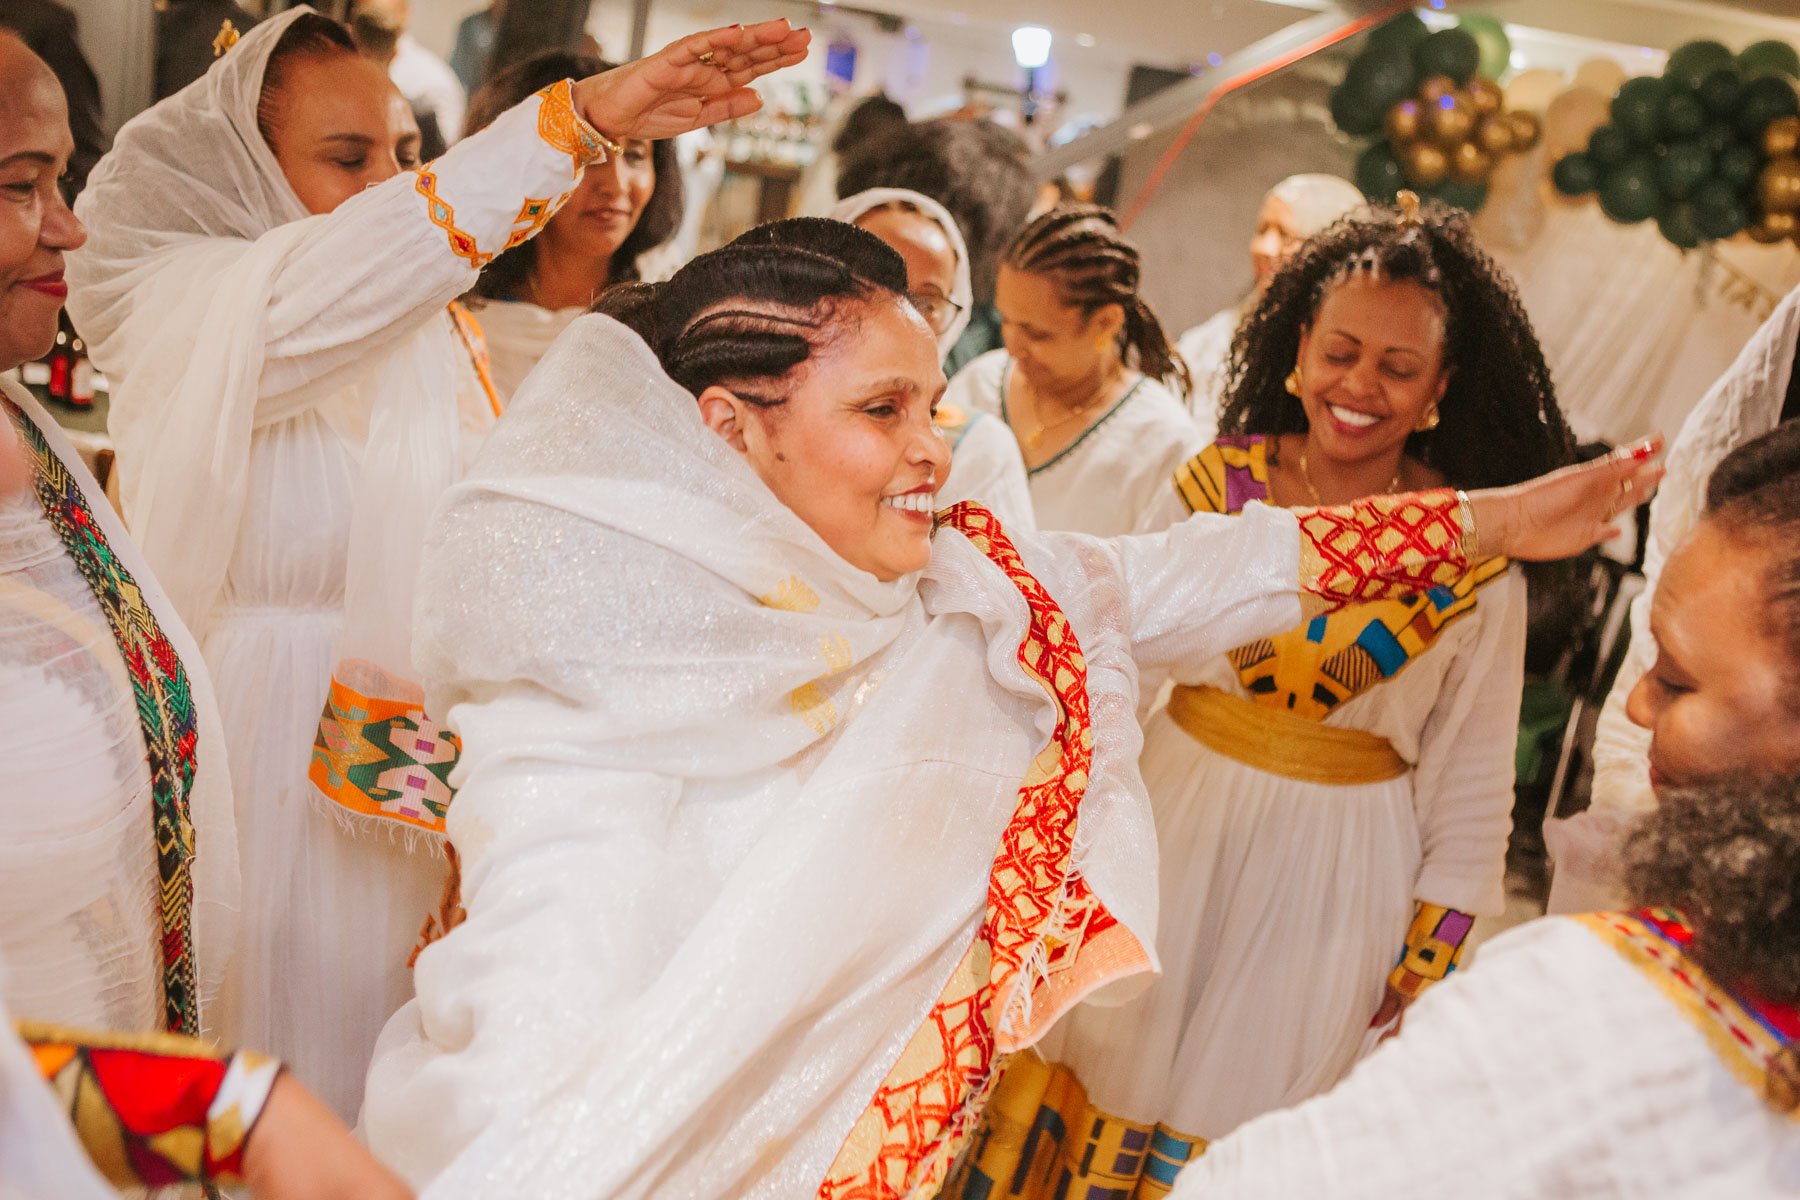 Guests of the Christening dancing and dressed in traditional Eritrean dress.